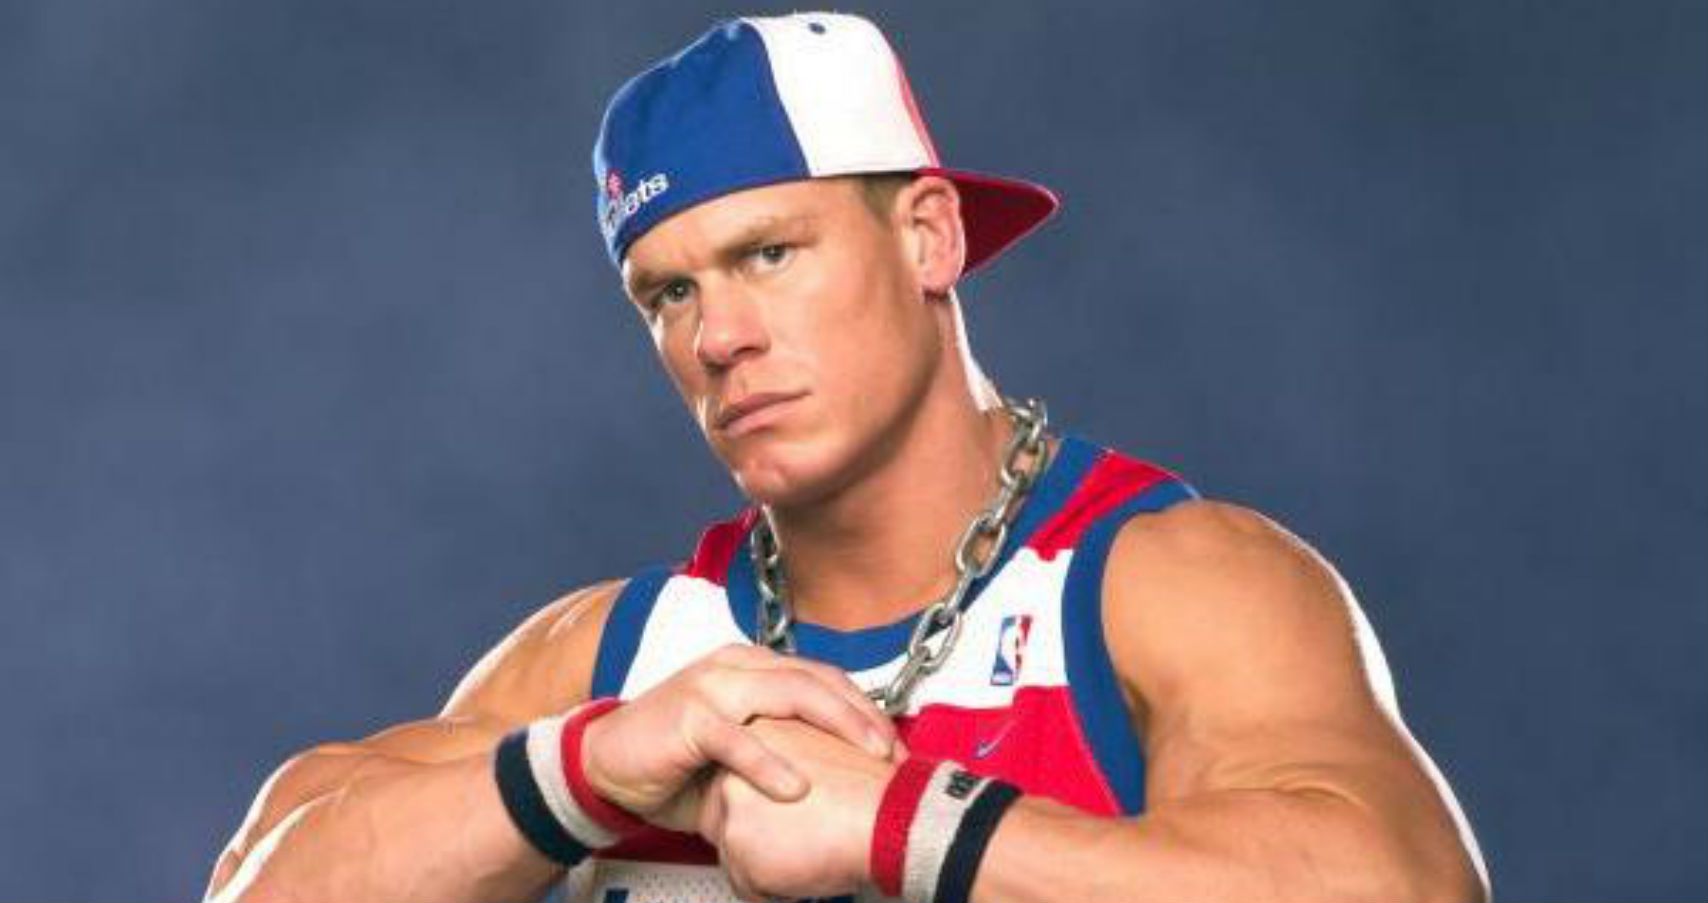 John Cena Reflects On His First WrestleMania Appearance